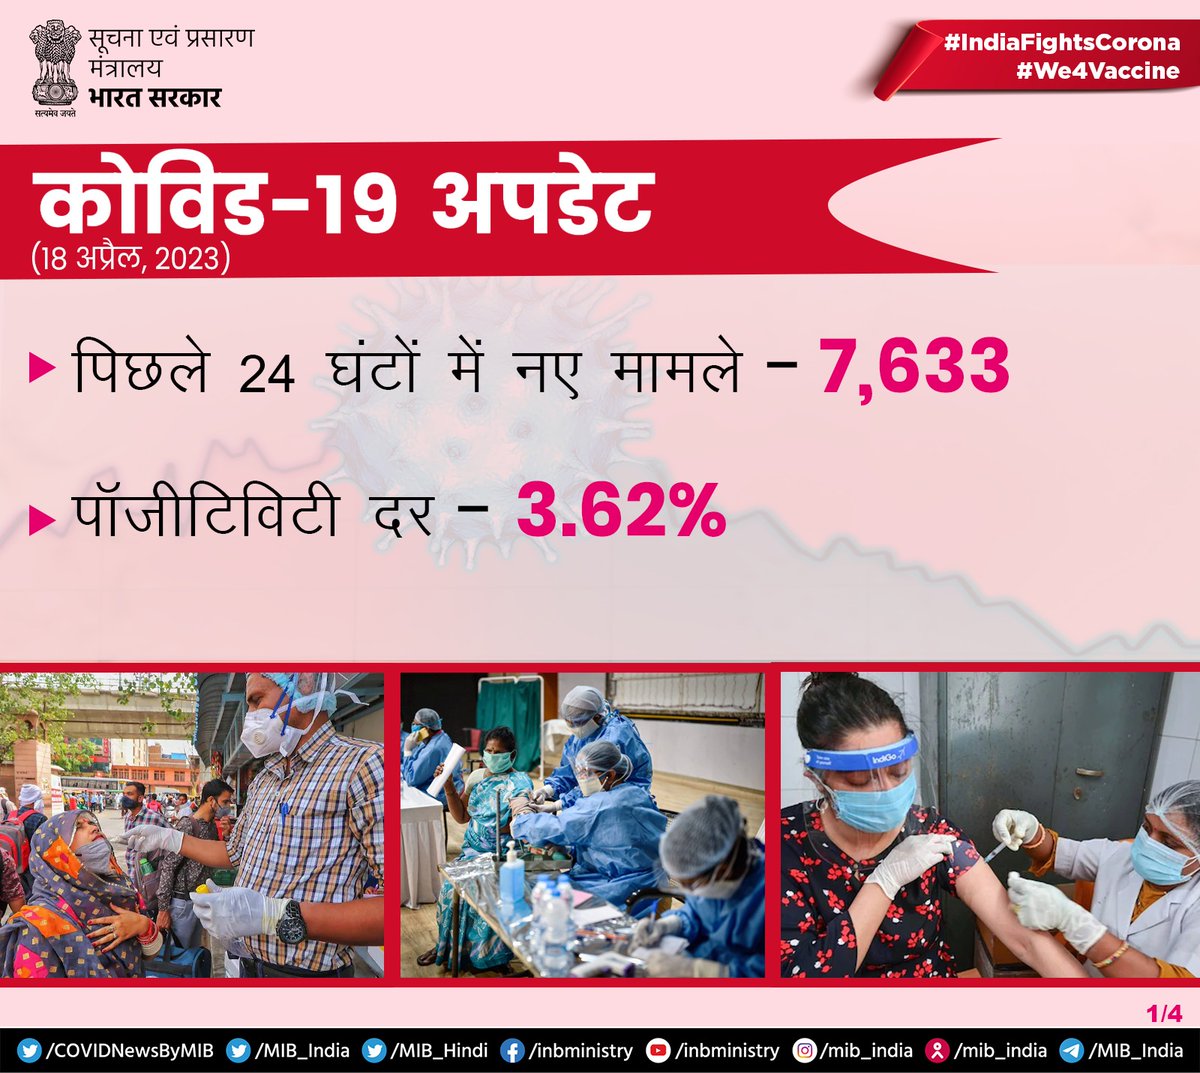 #IndiaFightsCorona:

#COVID19 UPDATE (As on 18th April, 2023) 

➡️7,633 new cases in the last 24 hours 

➡️Daily positivity rate - 3.62%

#Unite2FightCorona 
#COVID19Update
#We4Vaccine
#LargestVaccineDrive

@MoHFW_INDIA @mansukhmandviya @PIB_India